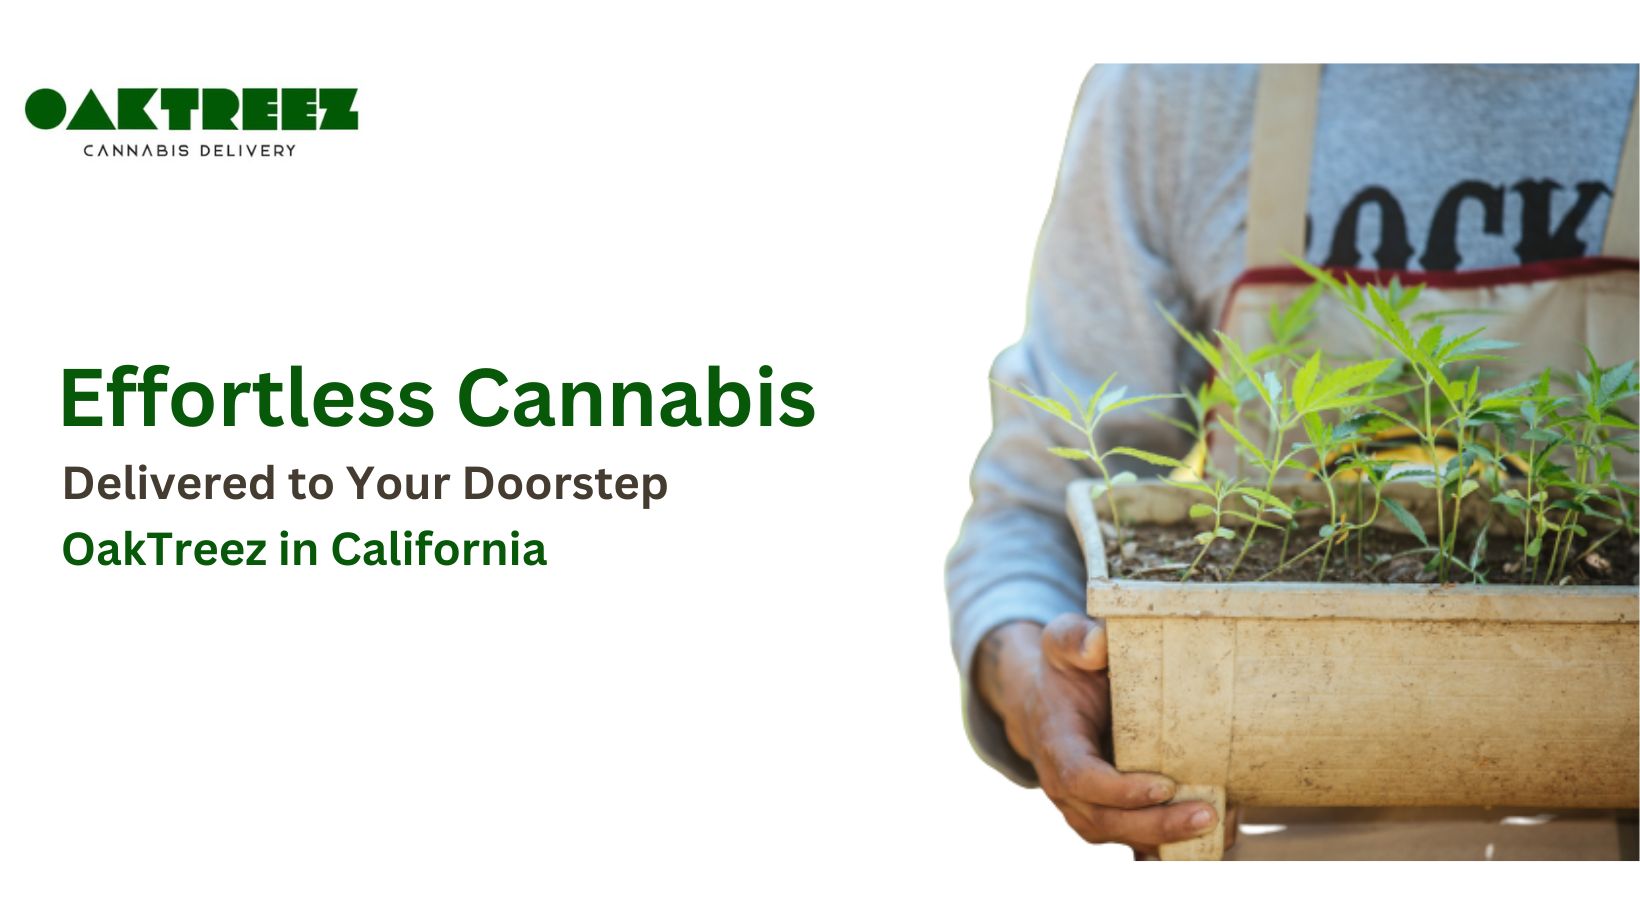 cannabis delivery service in oakland